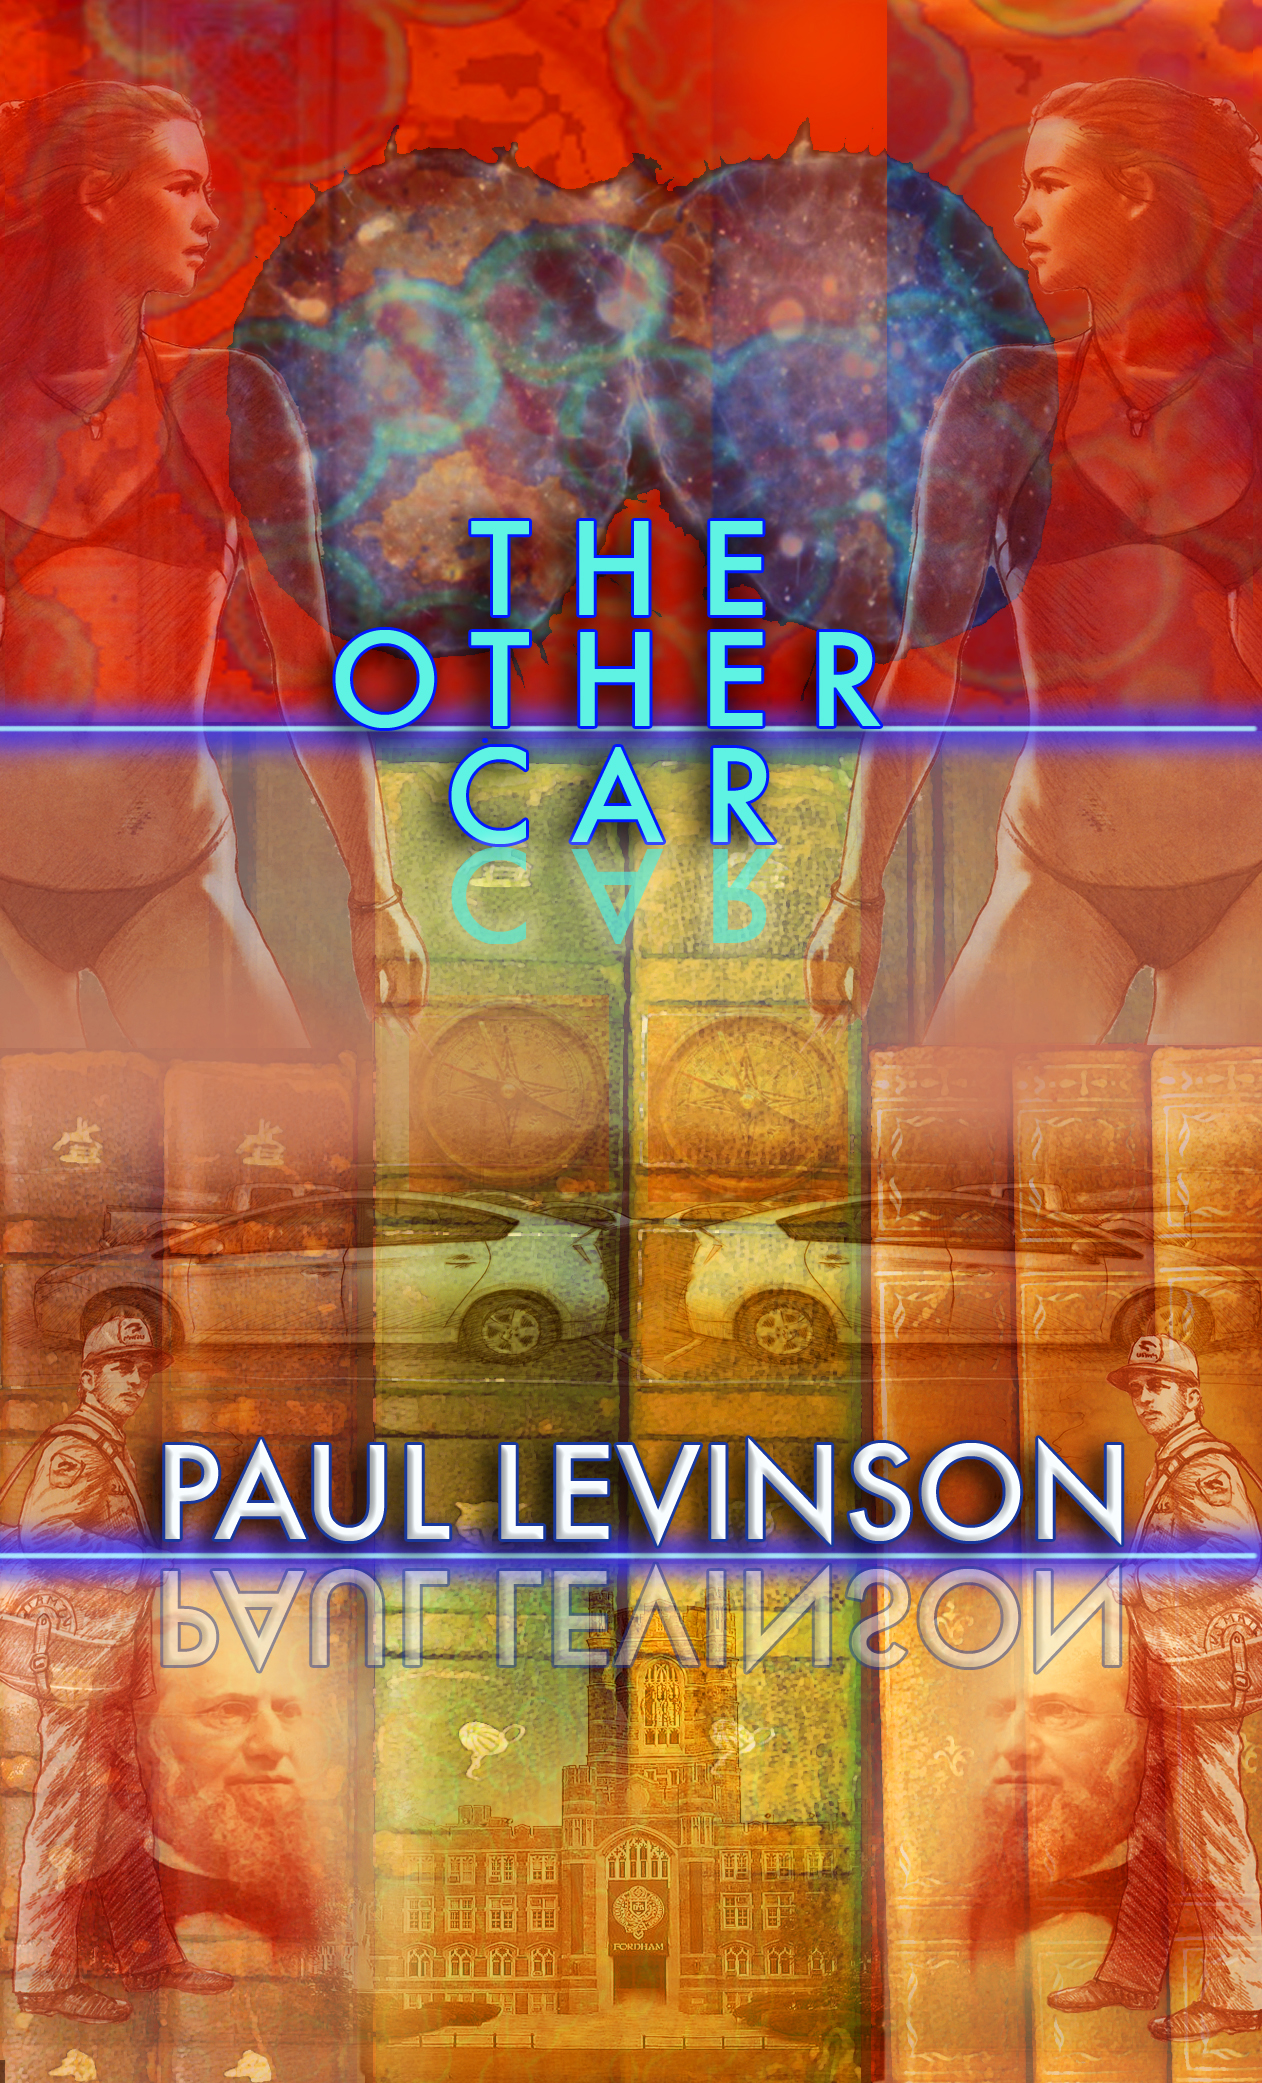 like alternate realities - step into The Other Car